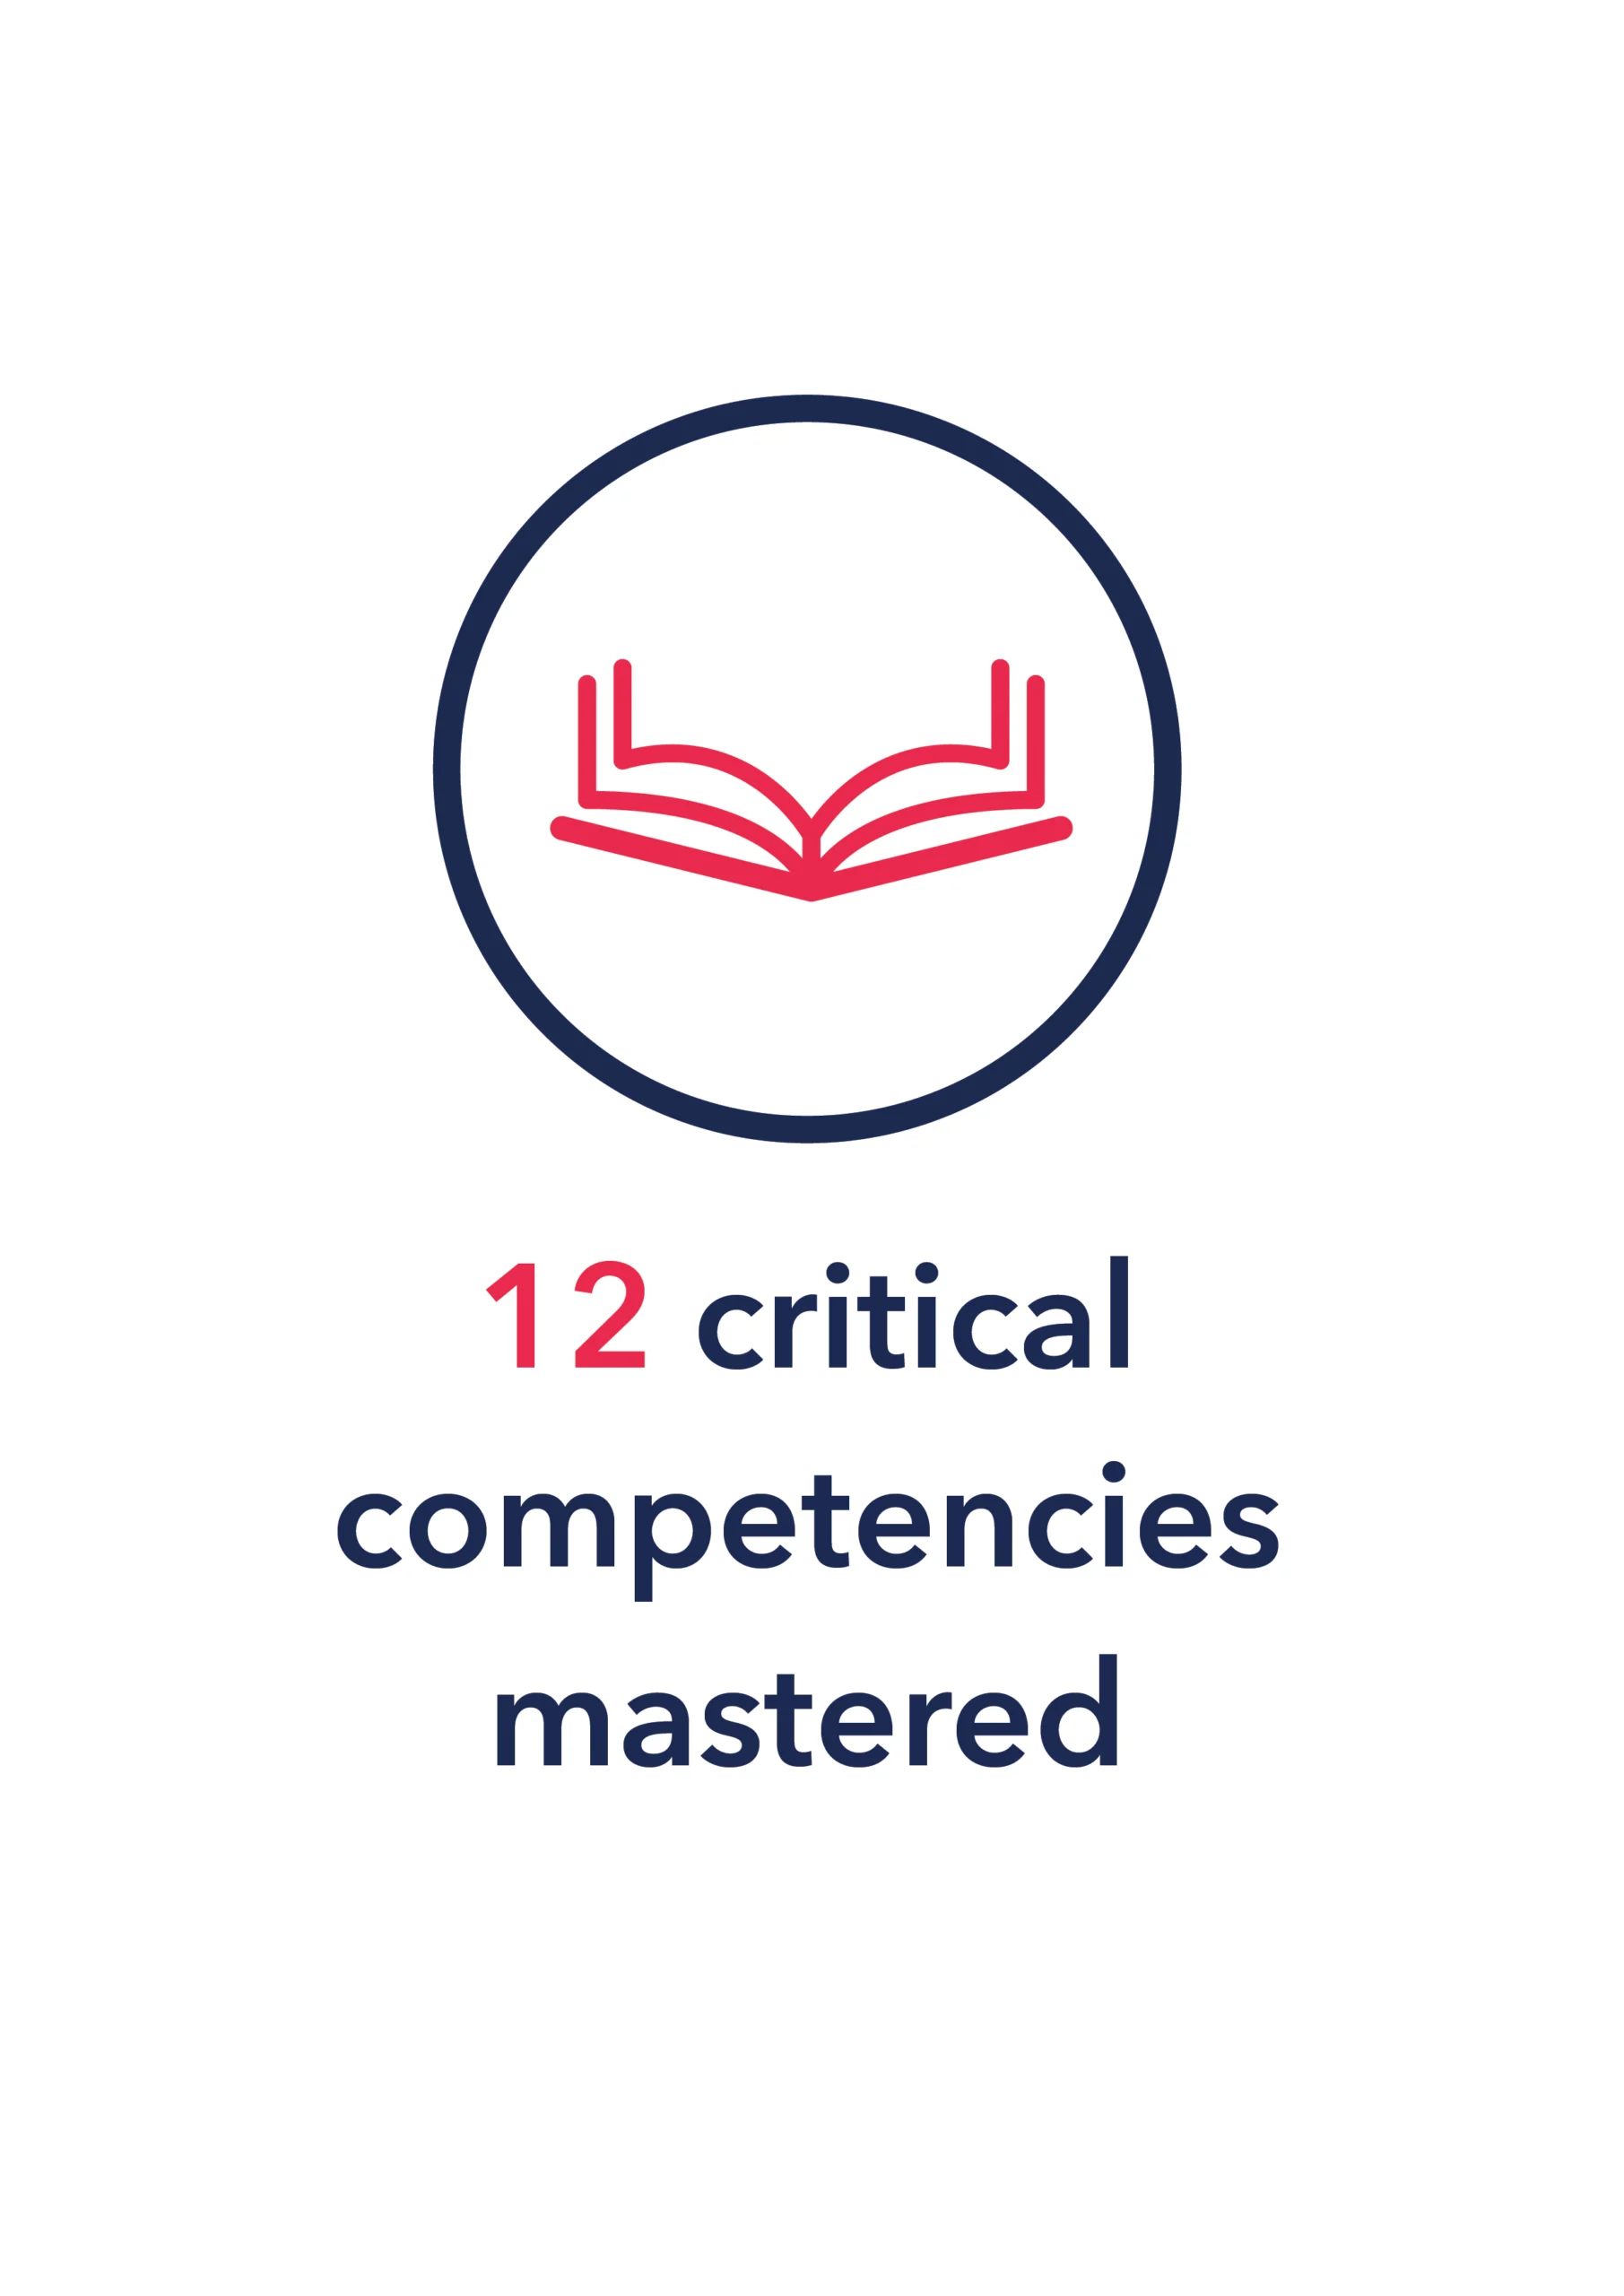 12 critical competencies mastered